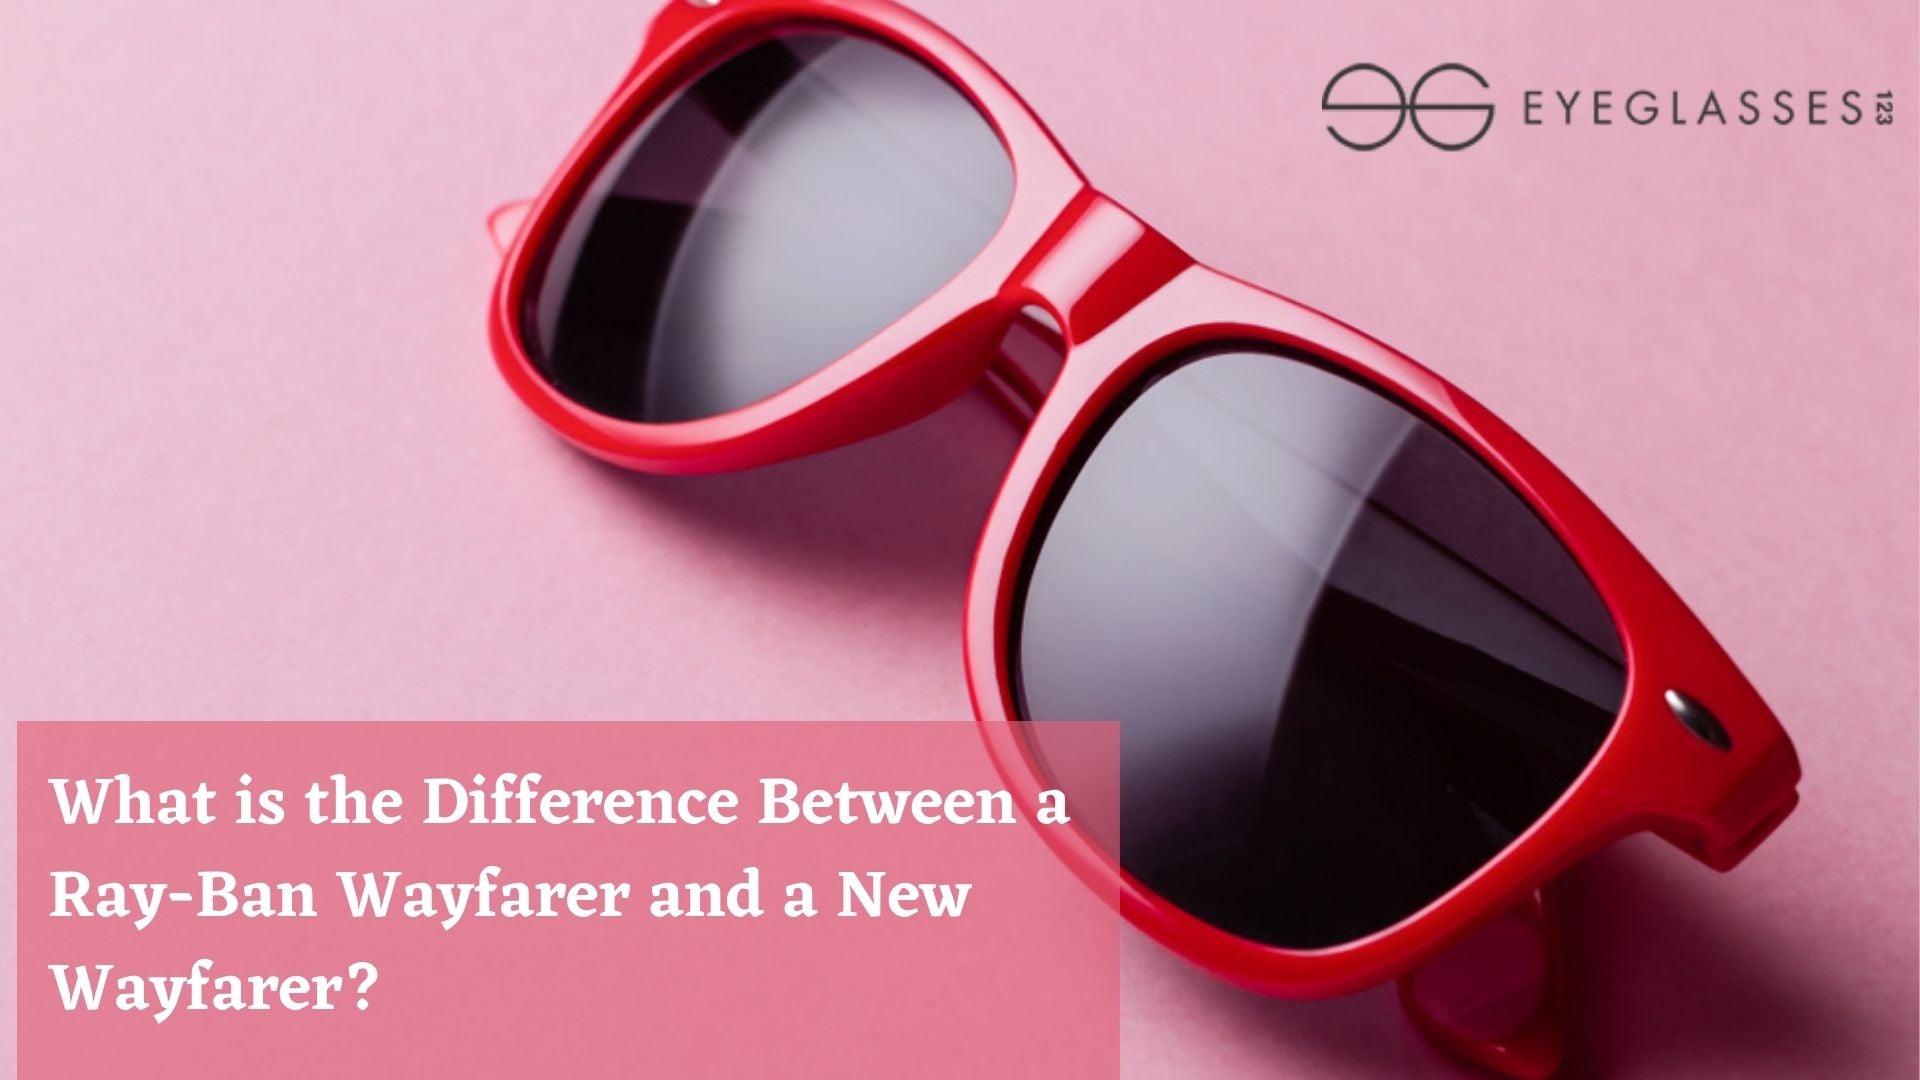 What is the Difference Between a Ray-Ban Wayfarer and a New Wayfarer